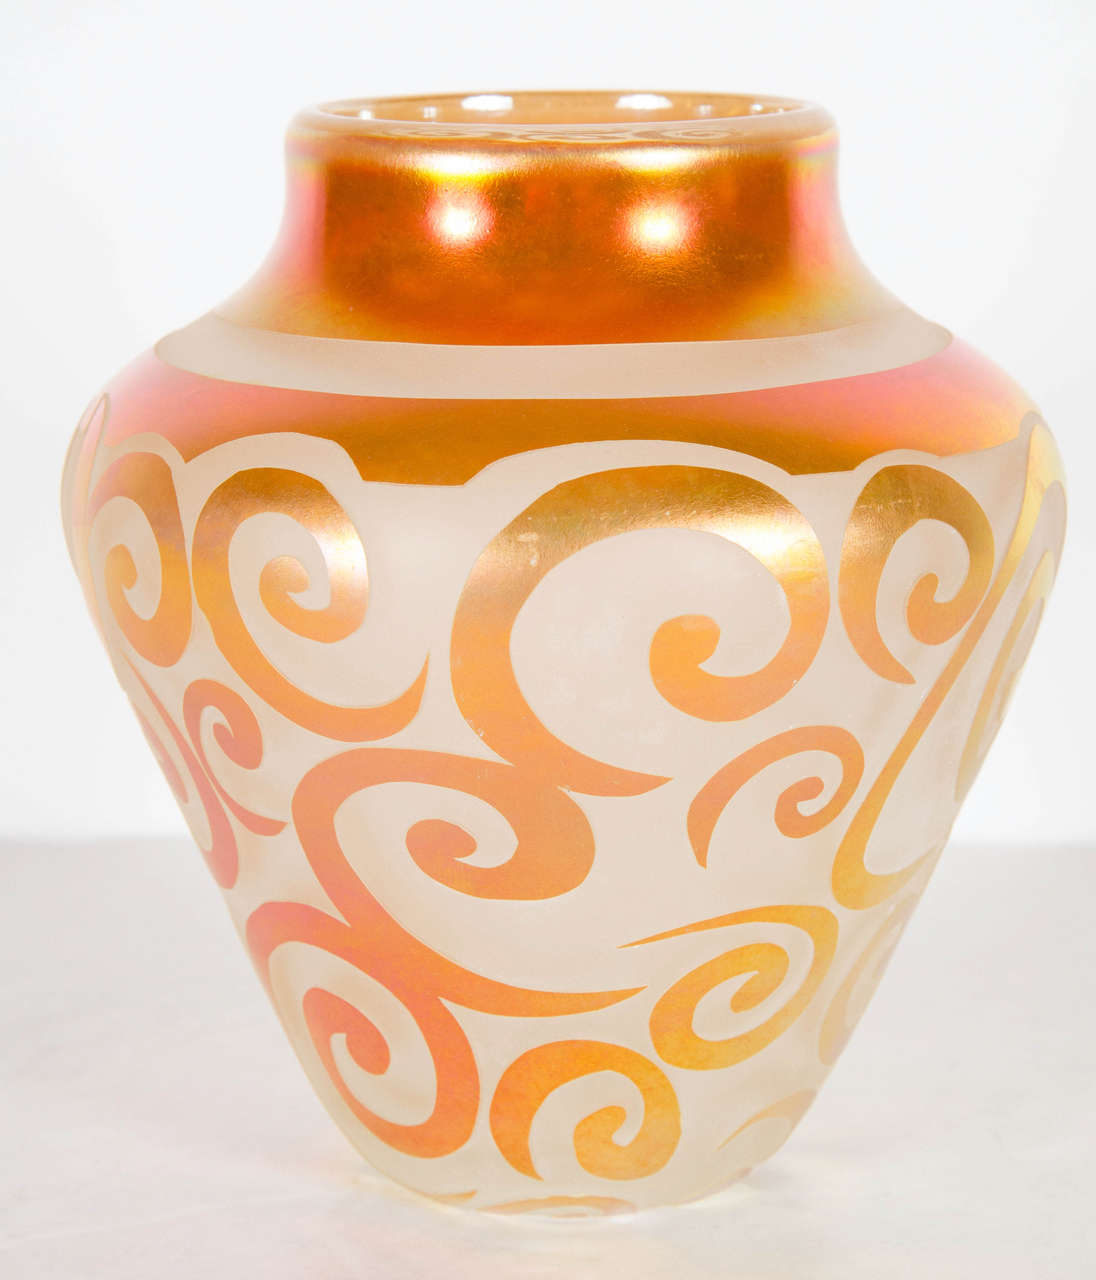 This very sophisticated vase is made of hand blown relief glass in hues of iridescent copper with a scroll design mist a frosted glass background. The vase is signed, numbered and dated 1998 and the edition number is 21/500 .Great as a decorative